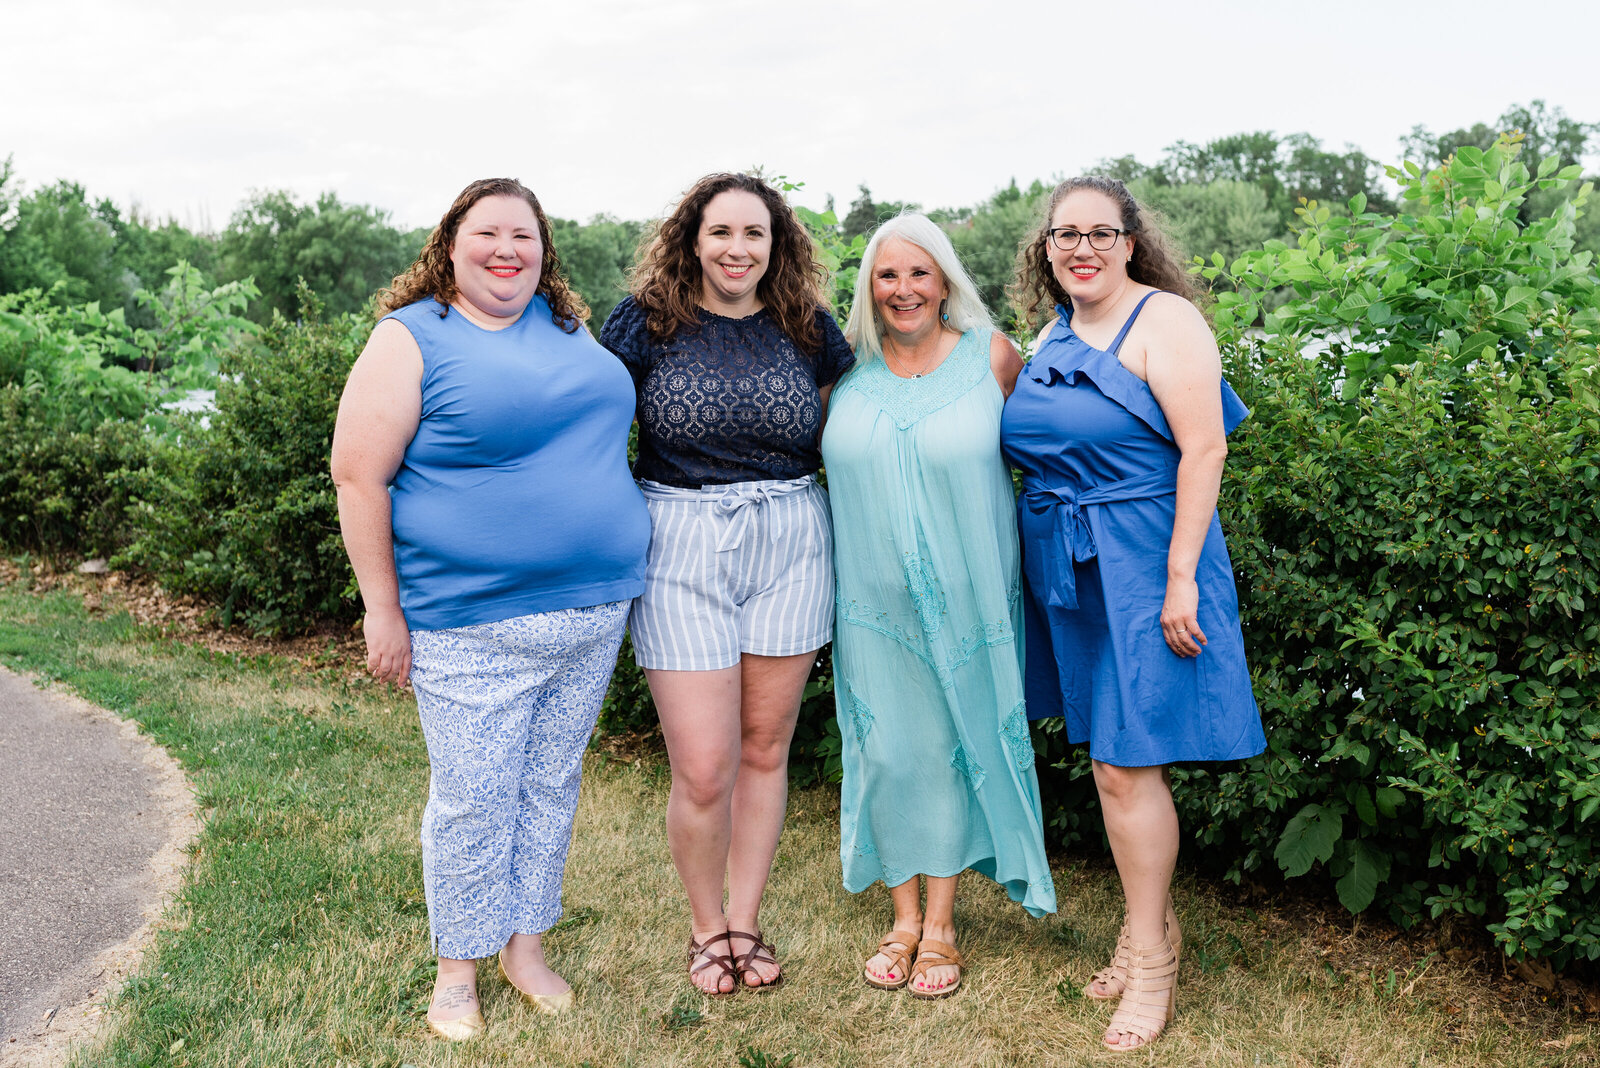 Three daughters and mother dressed in blue smiling